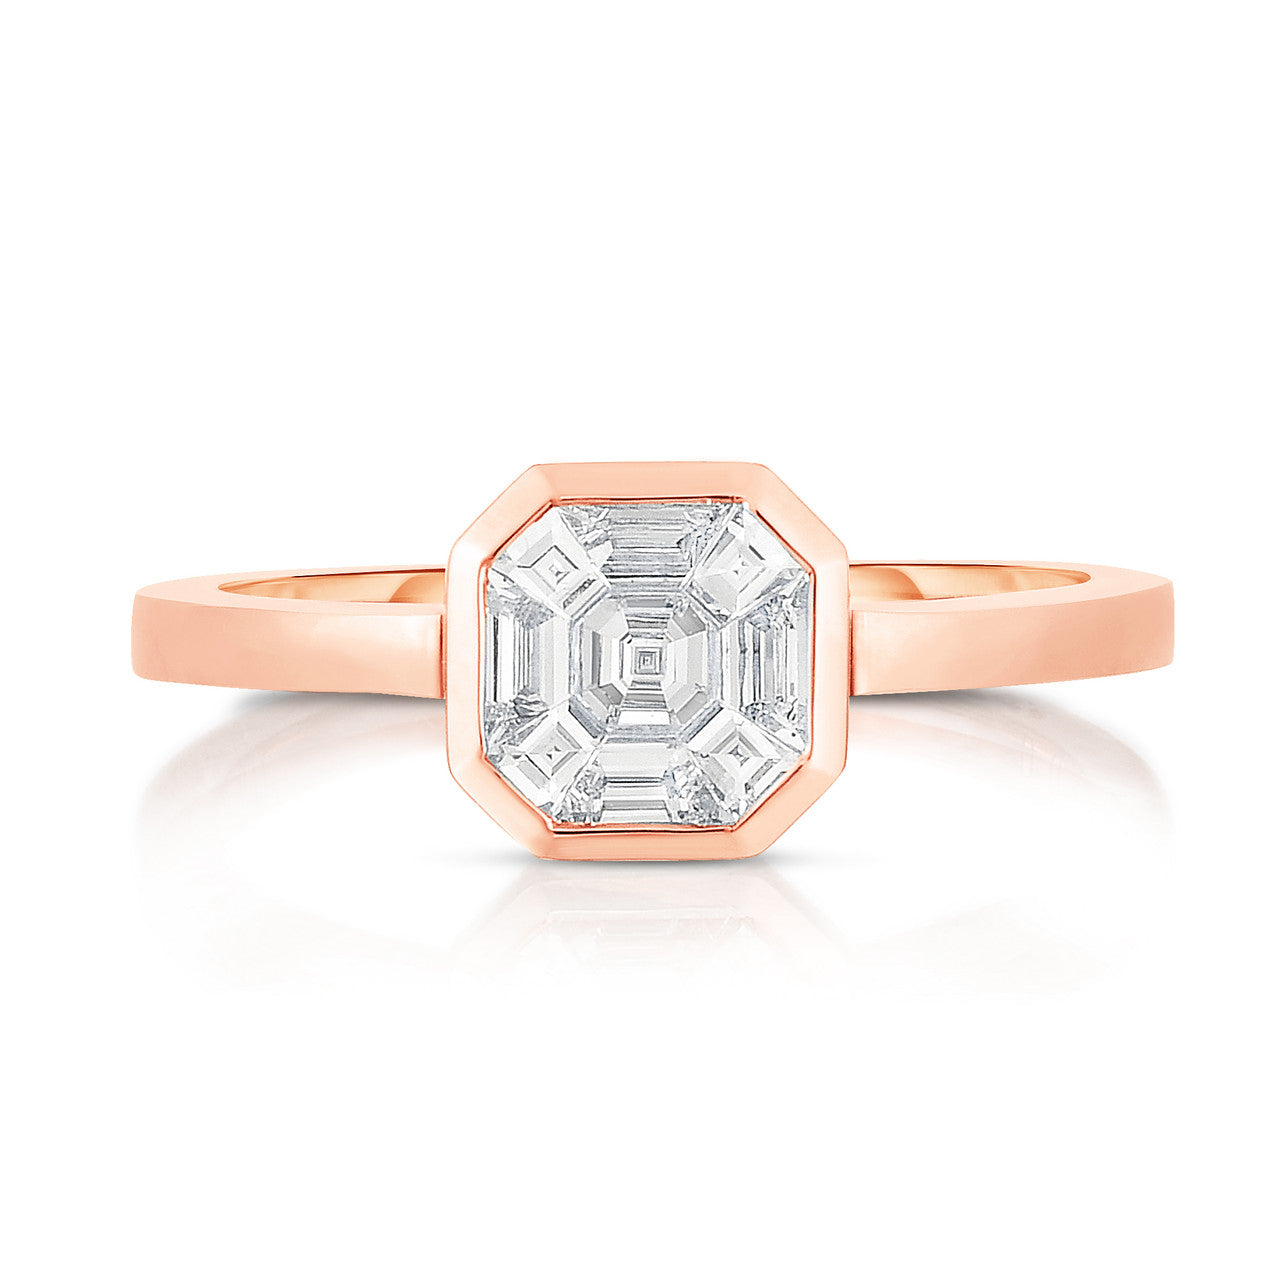 Thegoldencrafter 2.00 Ct Asscher Cut Orange Sapphire & Baguette Diamond Ring  925 Sterling Silver Unique Engagement Ring 14K White Gold Plated (5) |  Amazon.com